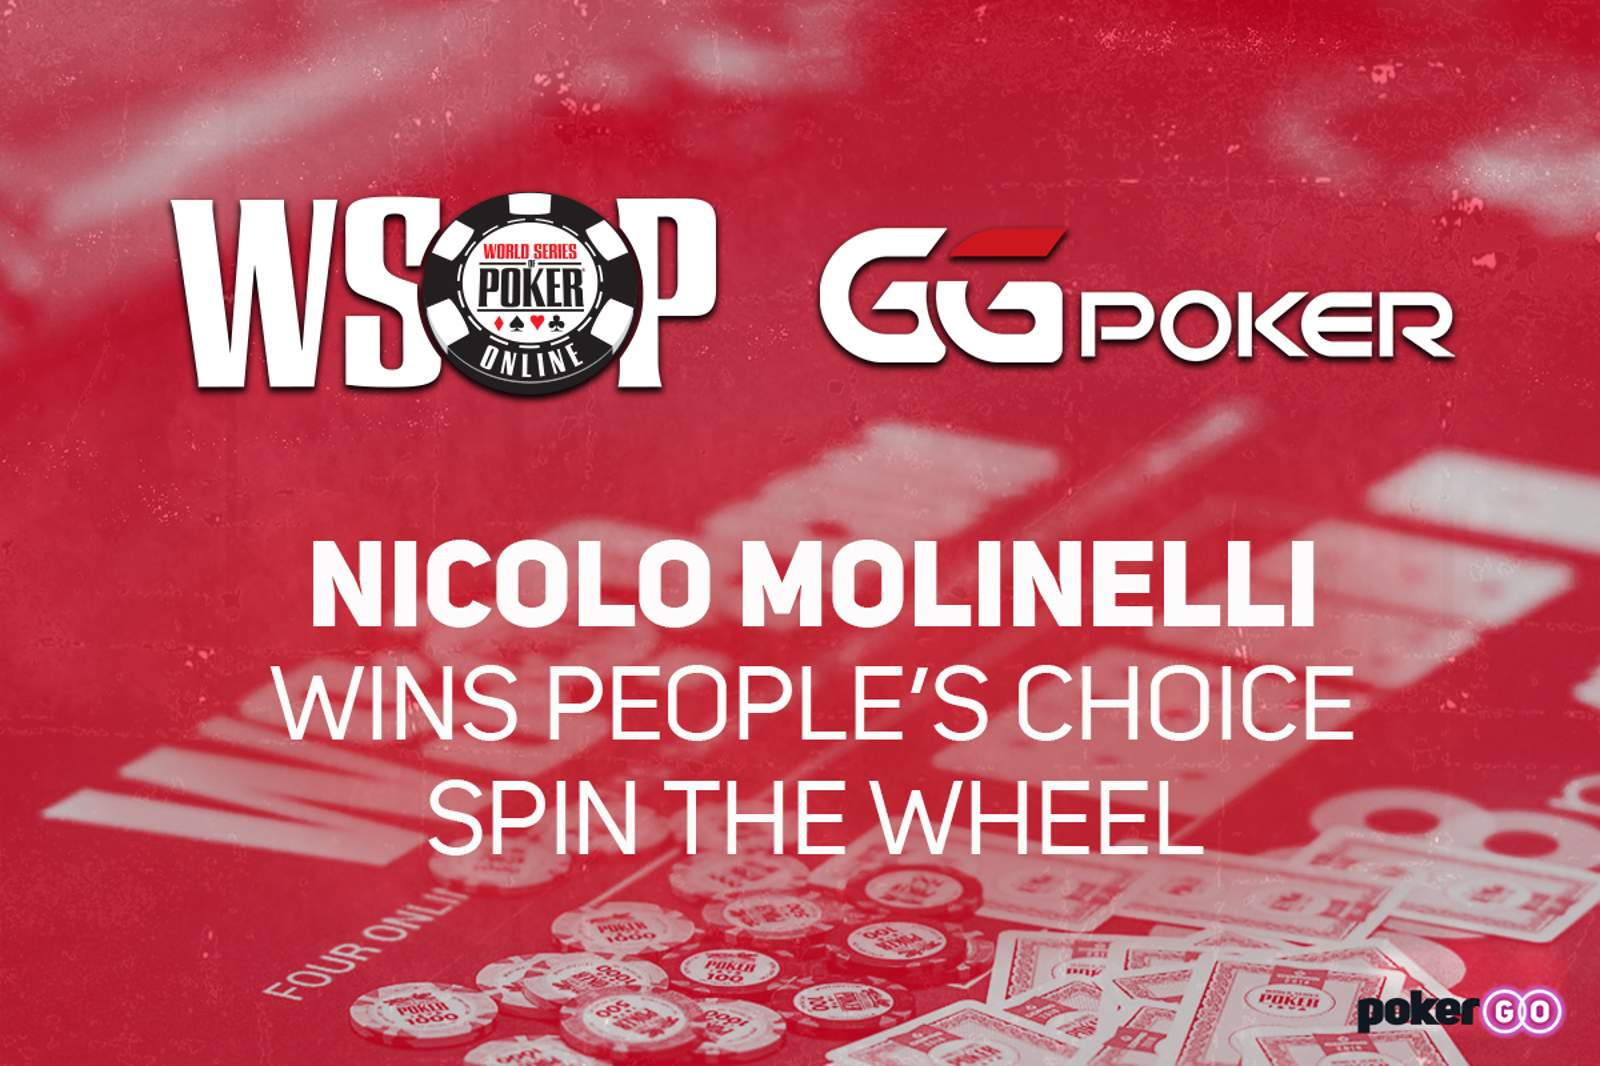 Nicolo Molinelli Wins GGPoker WSOP Online People's Choice Spin the Wheel for $243,415